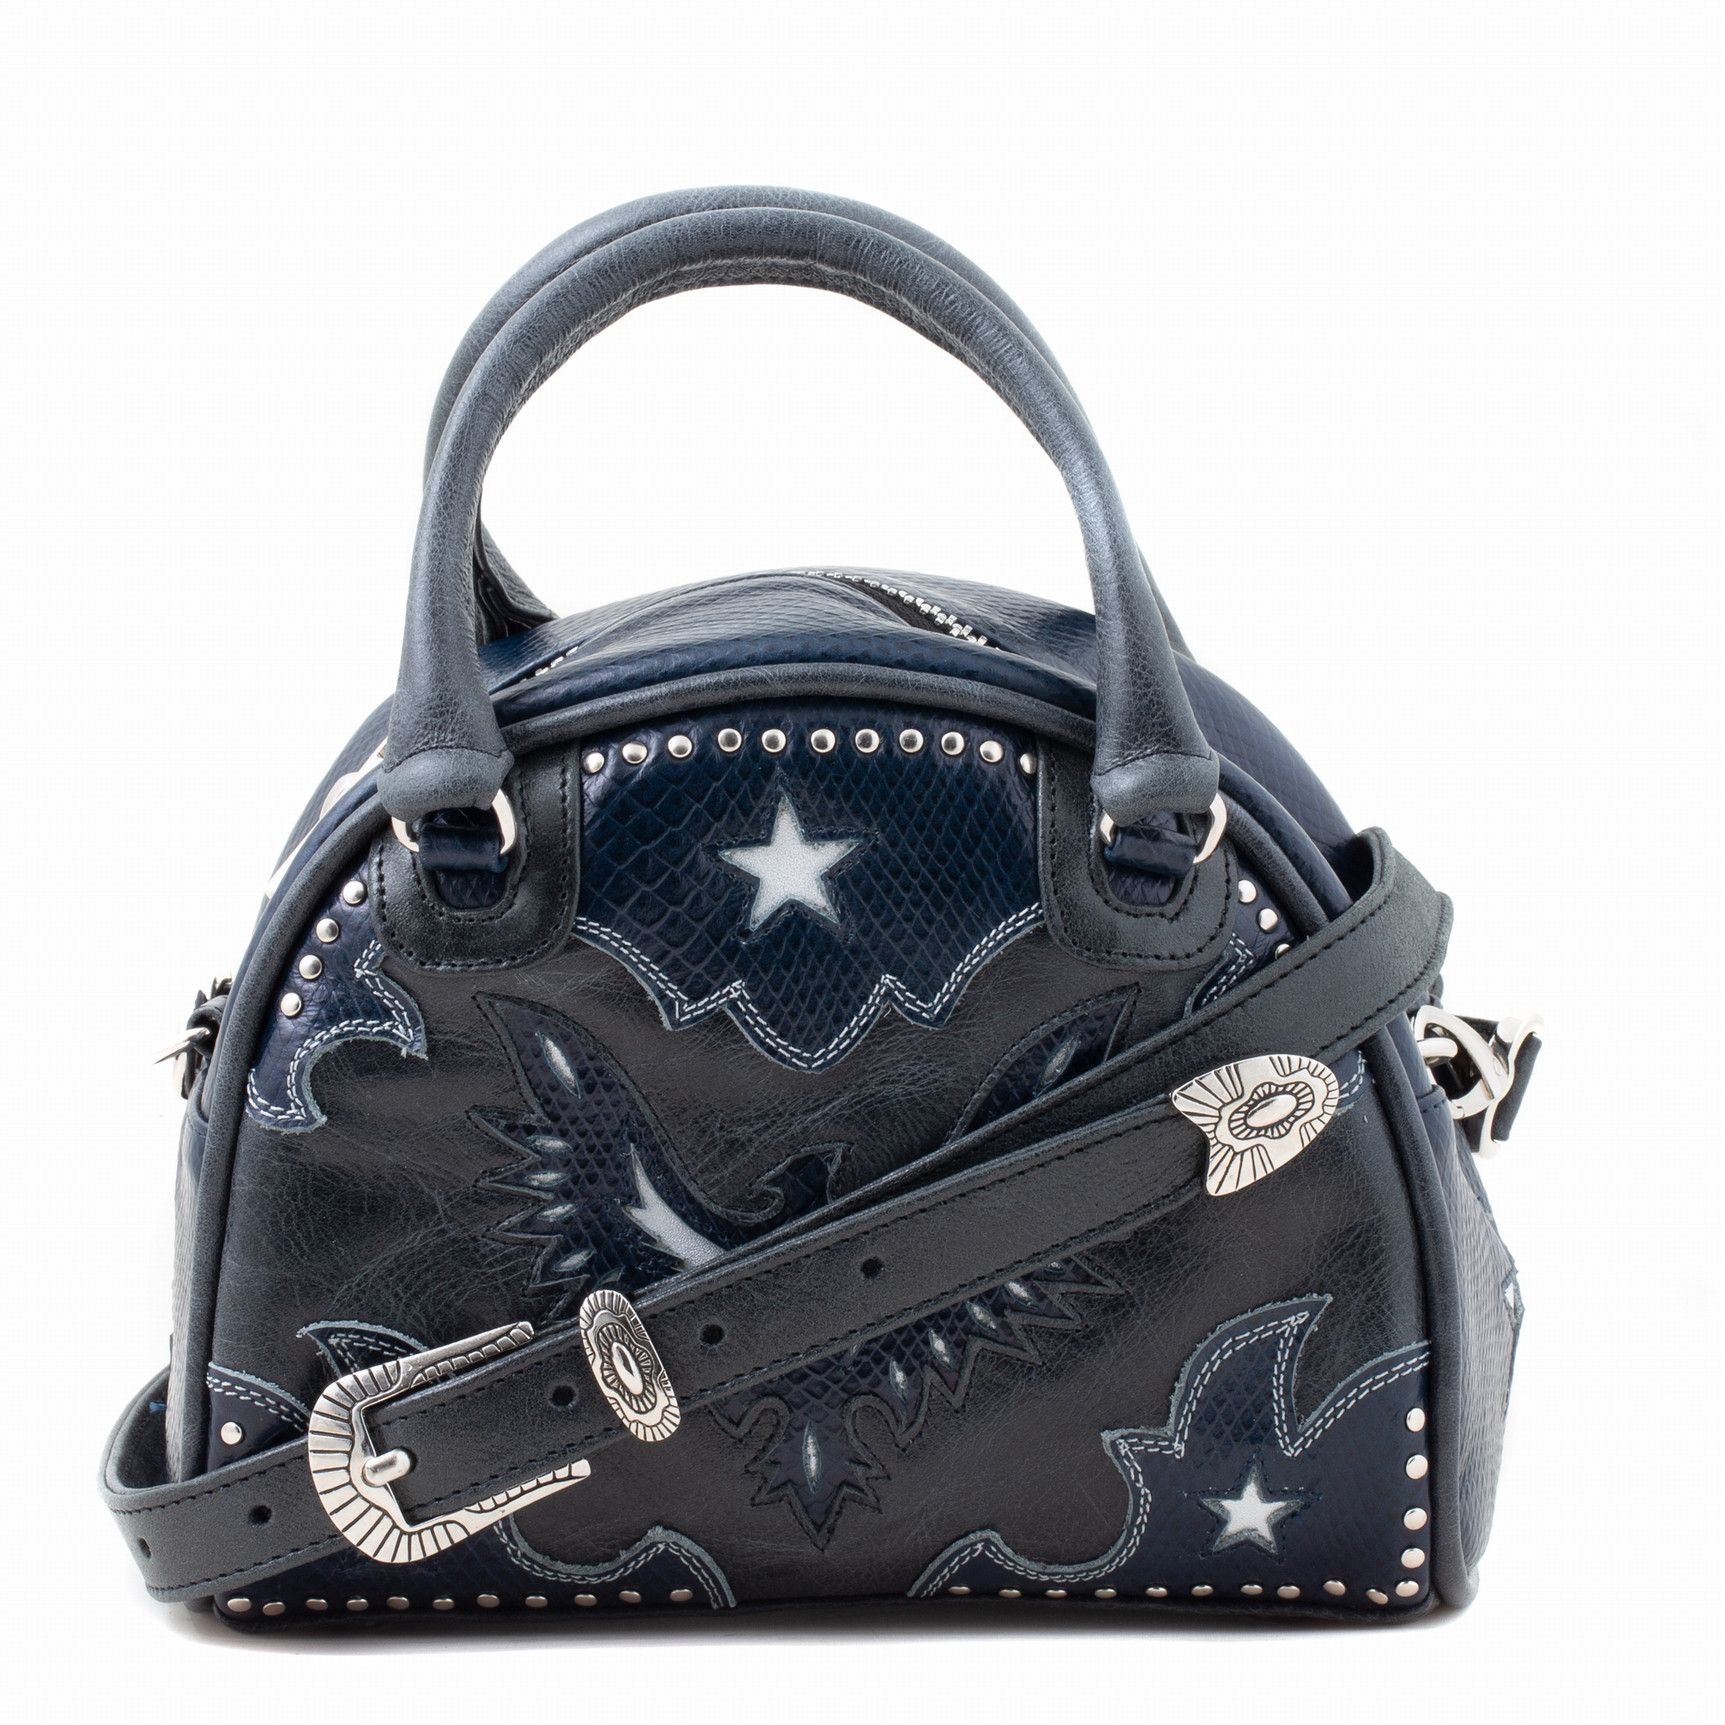 BOWLING BAG BLACK BLUE WHITE MINI BOWLING BAG WITH LEATHER INLAY AND STUDS  Mix color black / blue / white  Cowhide leather  Lea